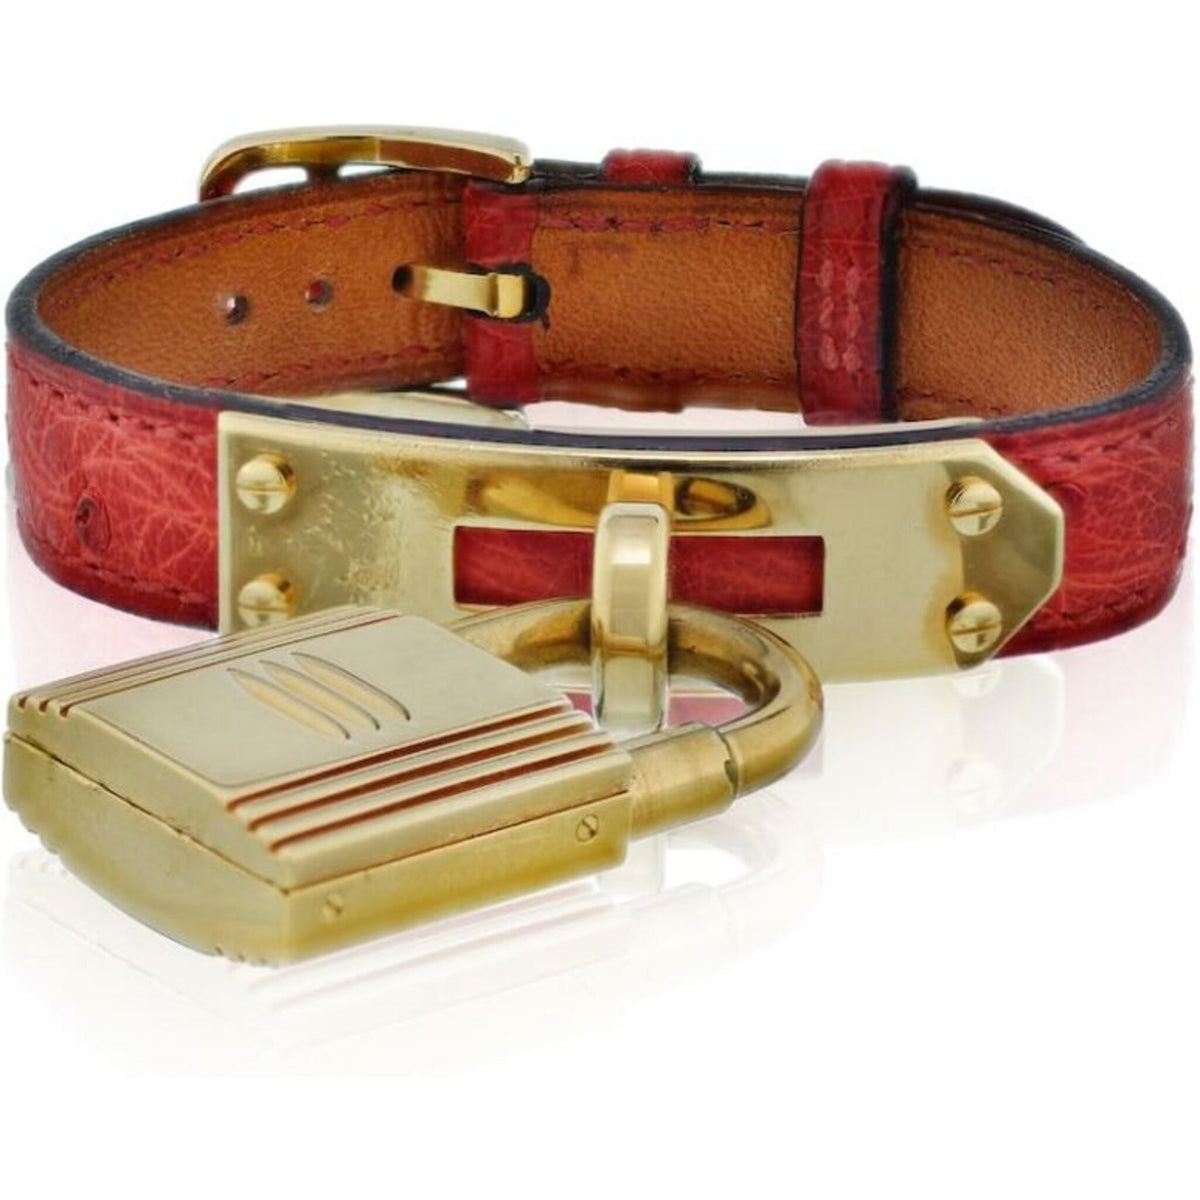 Hermes - Kelly Stainless Steel Red Lizard Strap with Gold Tone Dial Watch